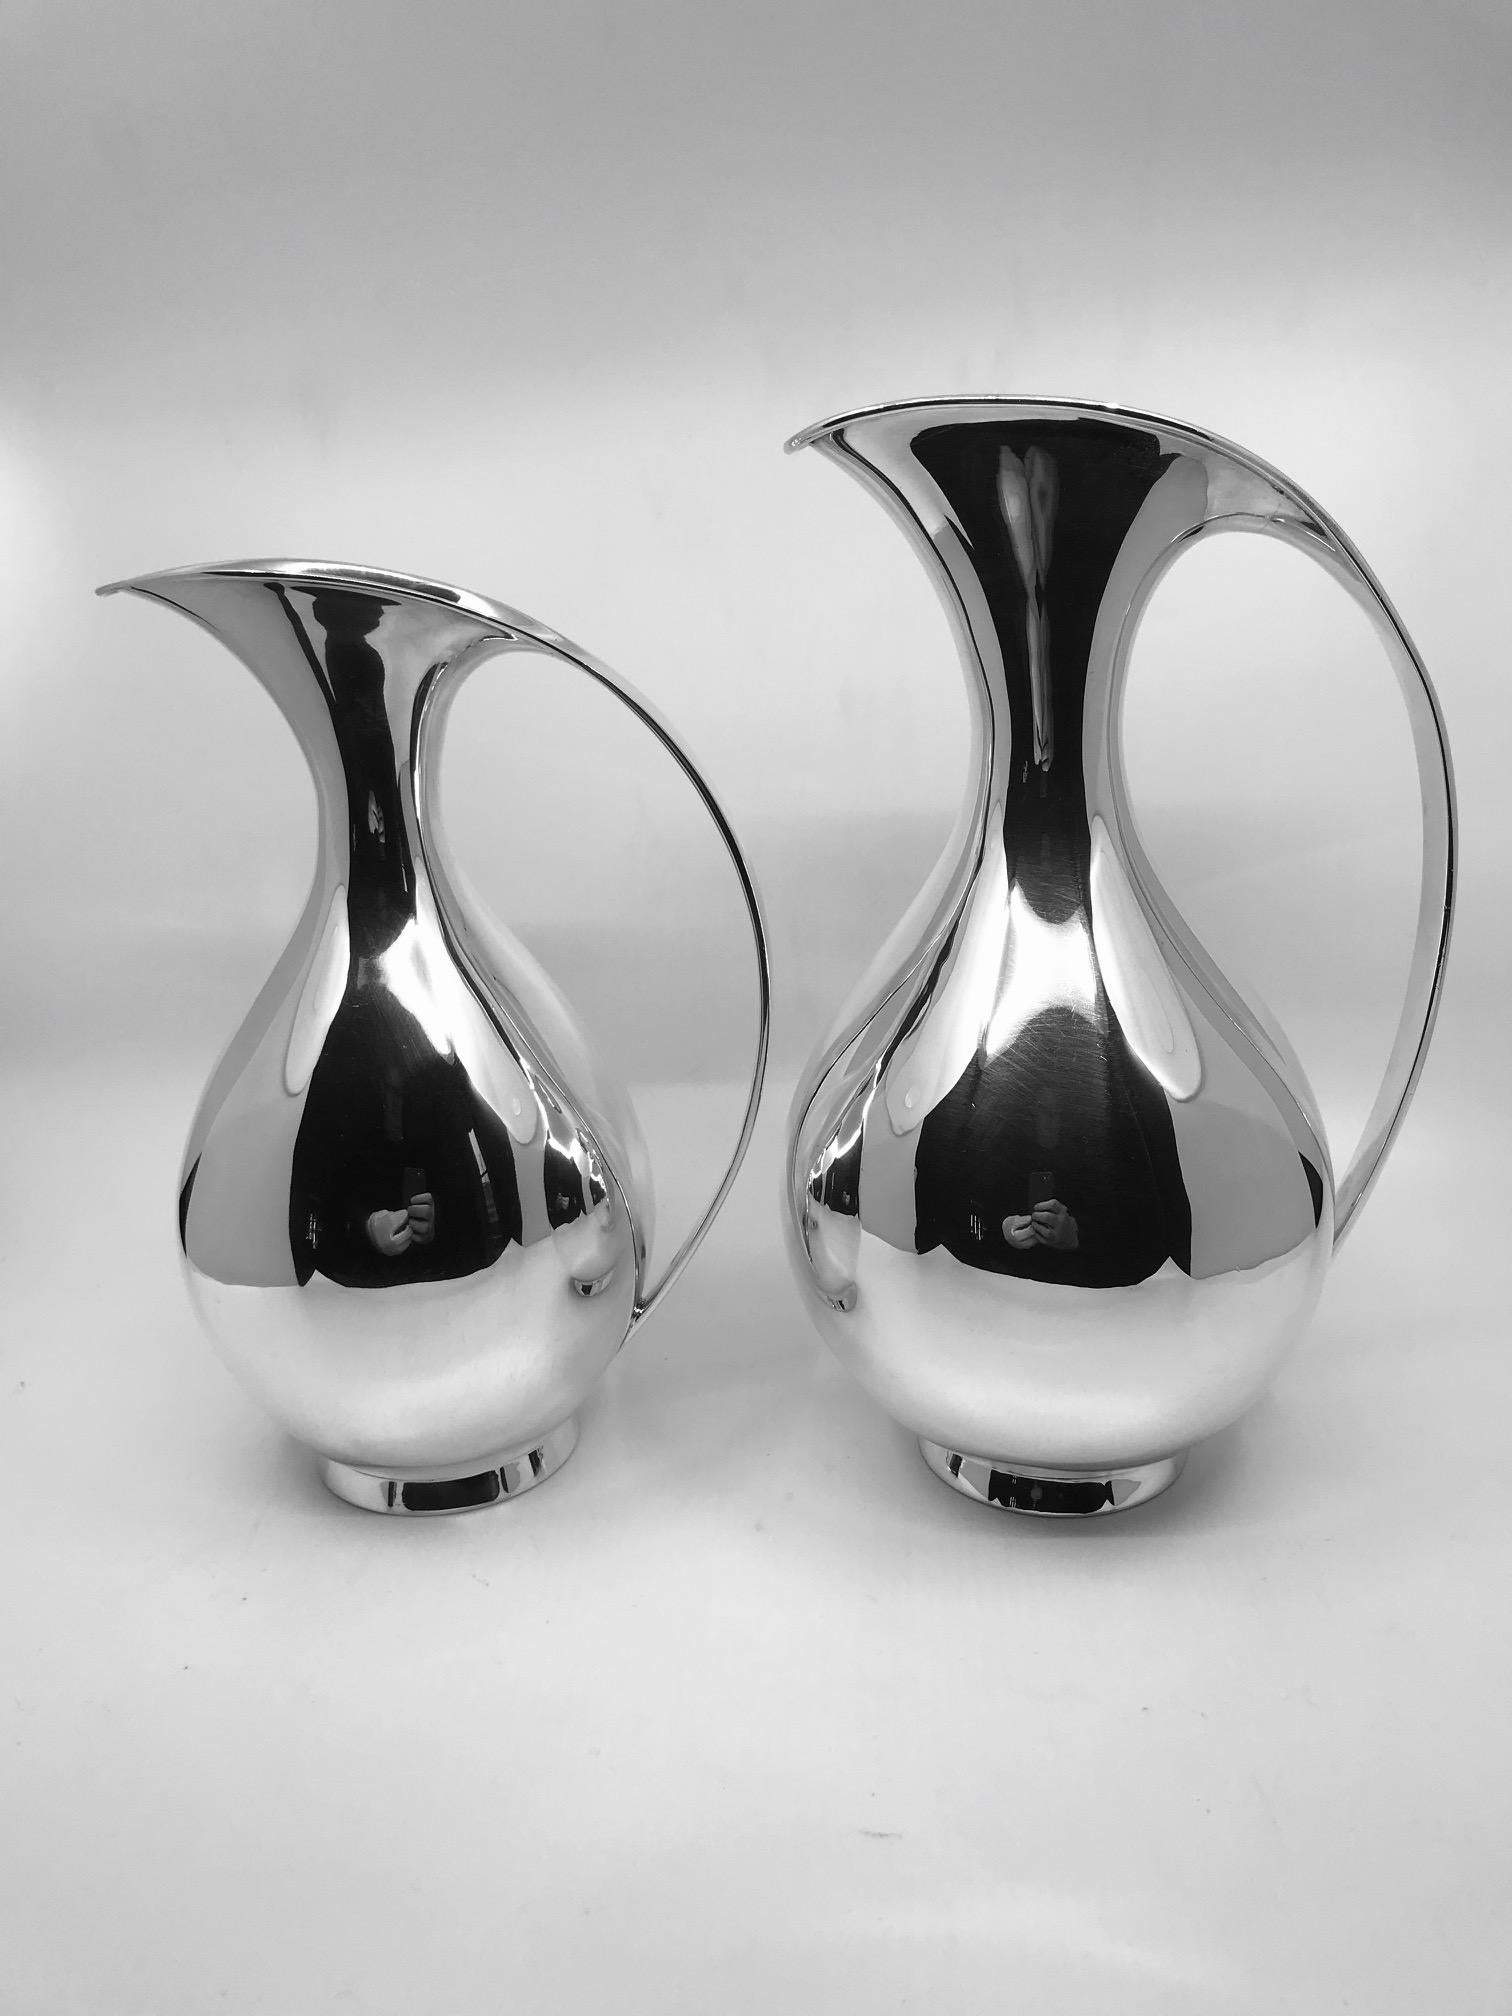 This is a pair of A. Michelsen sterling silver pitchers designed by Kay Fisker in 1935, from a private estate in London. Fisker designed two sizes of this pitcher, both are represented here and sold together. This design has been at the forefront